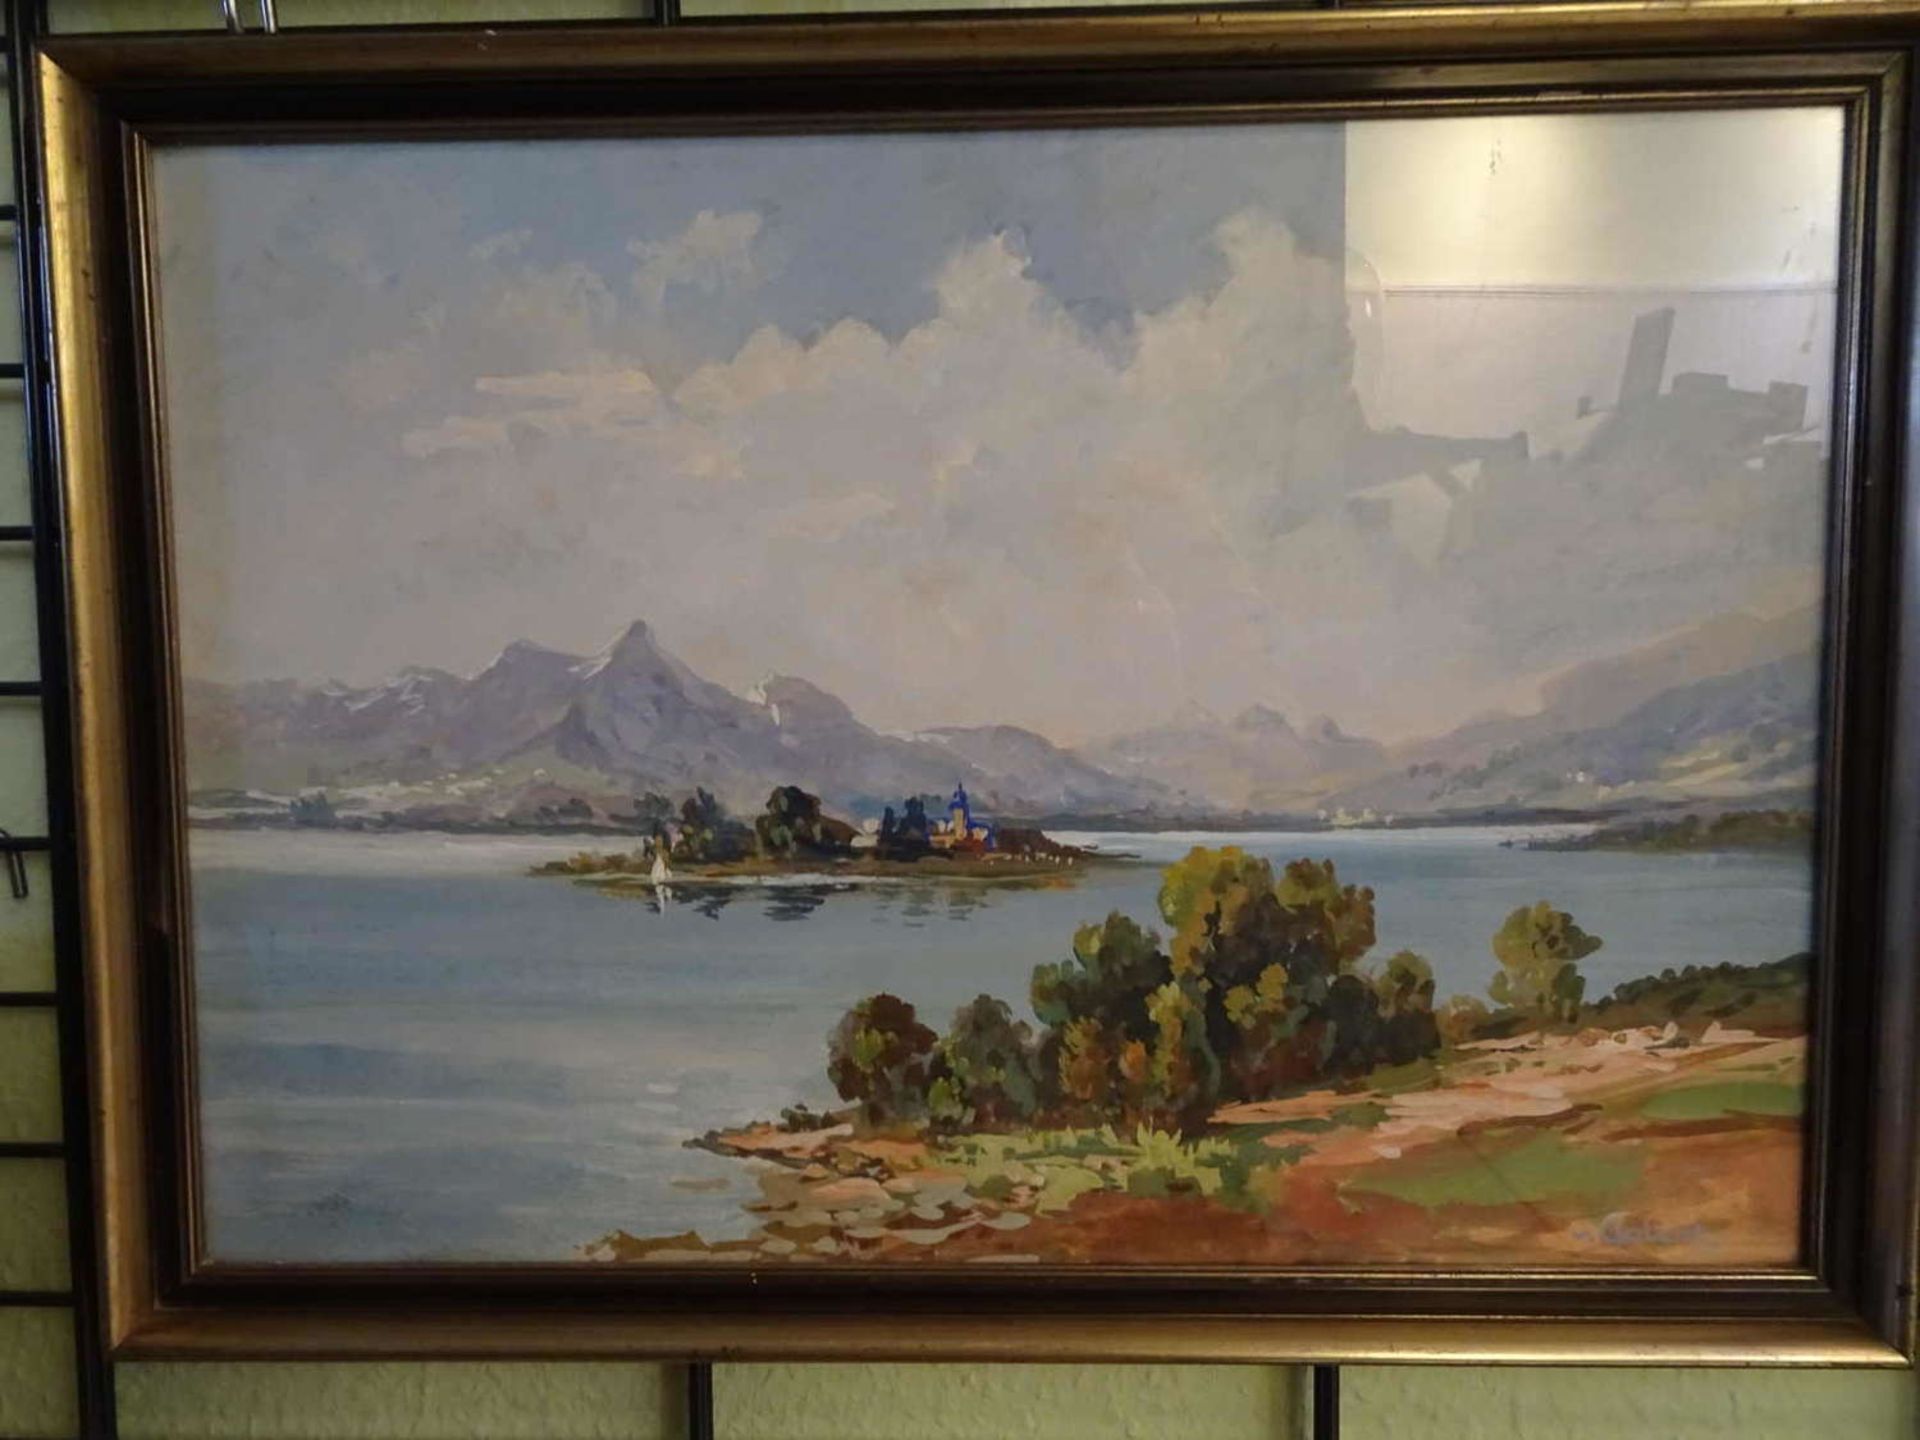 Gerd v. Galentz, watercolor on paper, "Fraueninsel Chiemsee", signed lower right. Framed behind